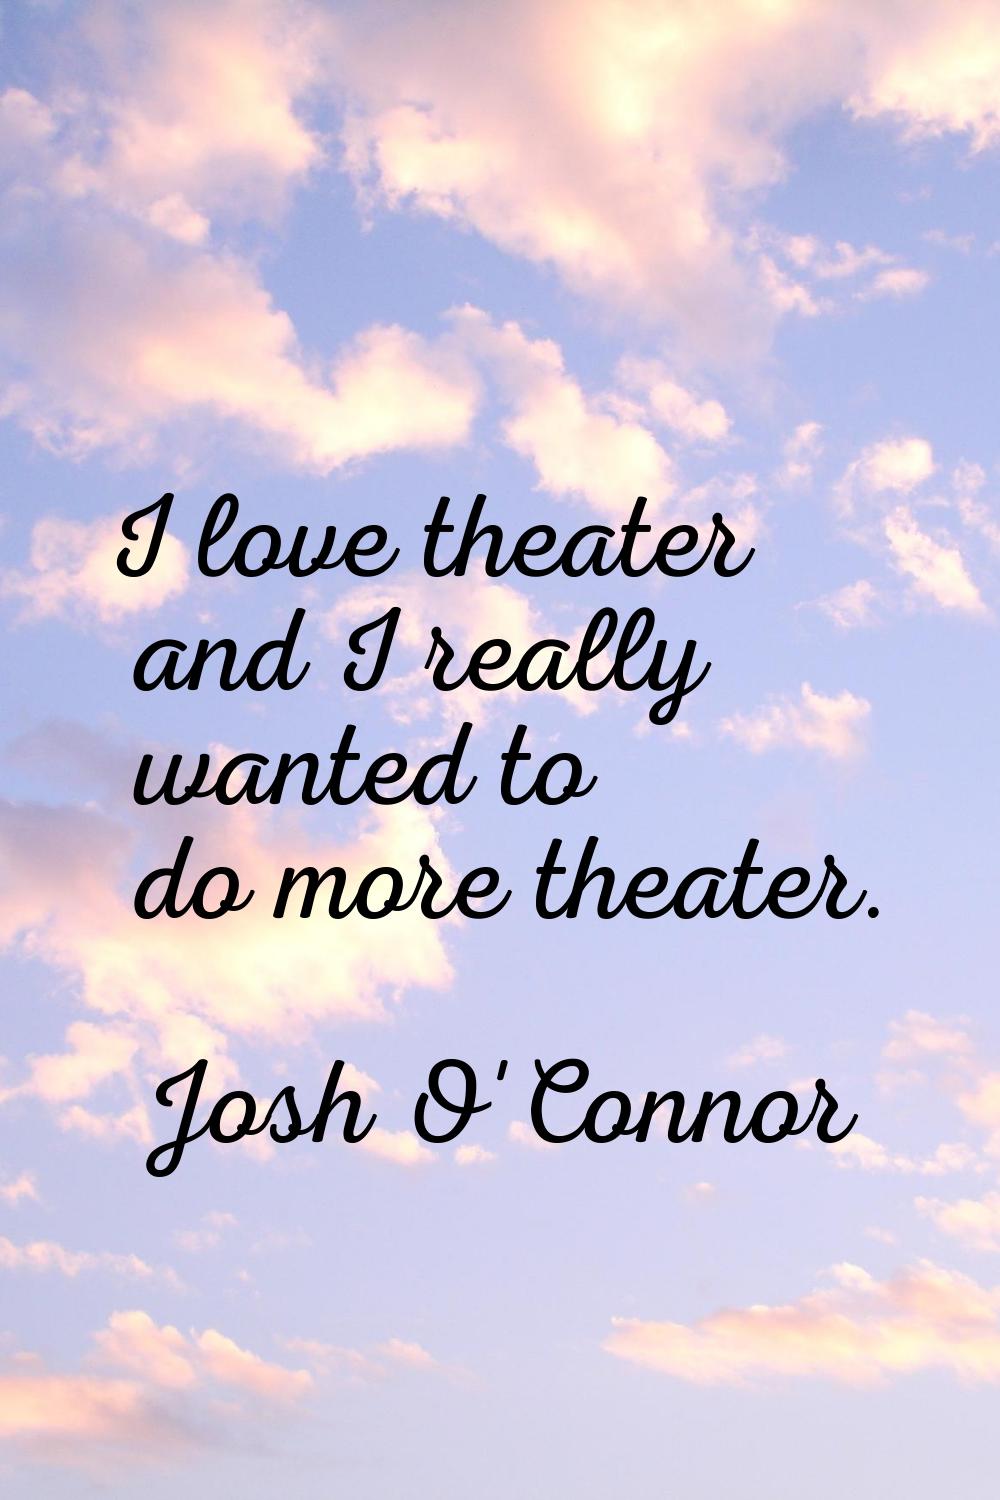 I love theater and I really wanted to do more theater.